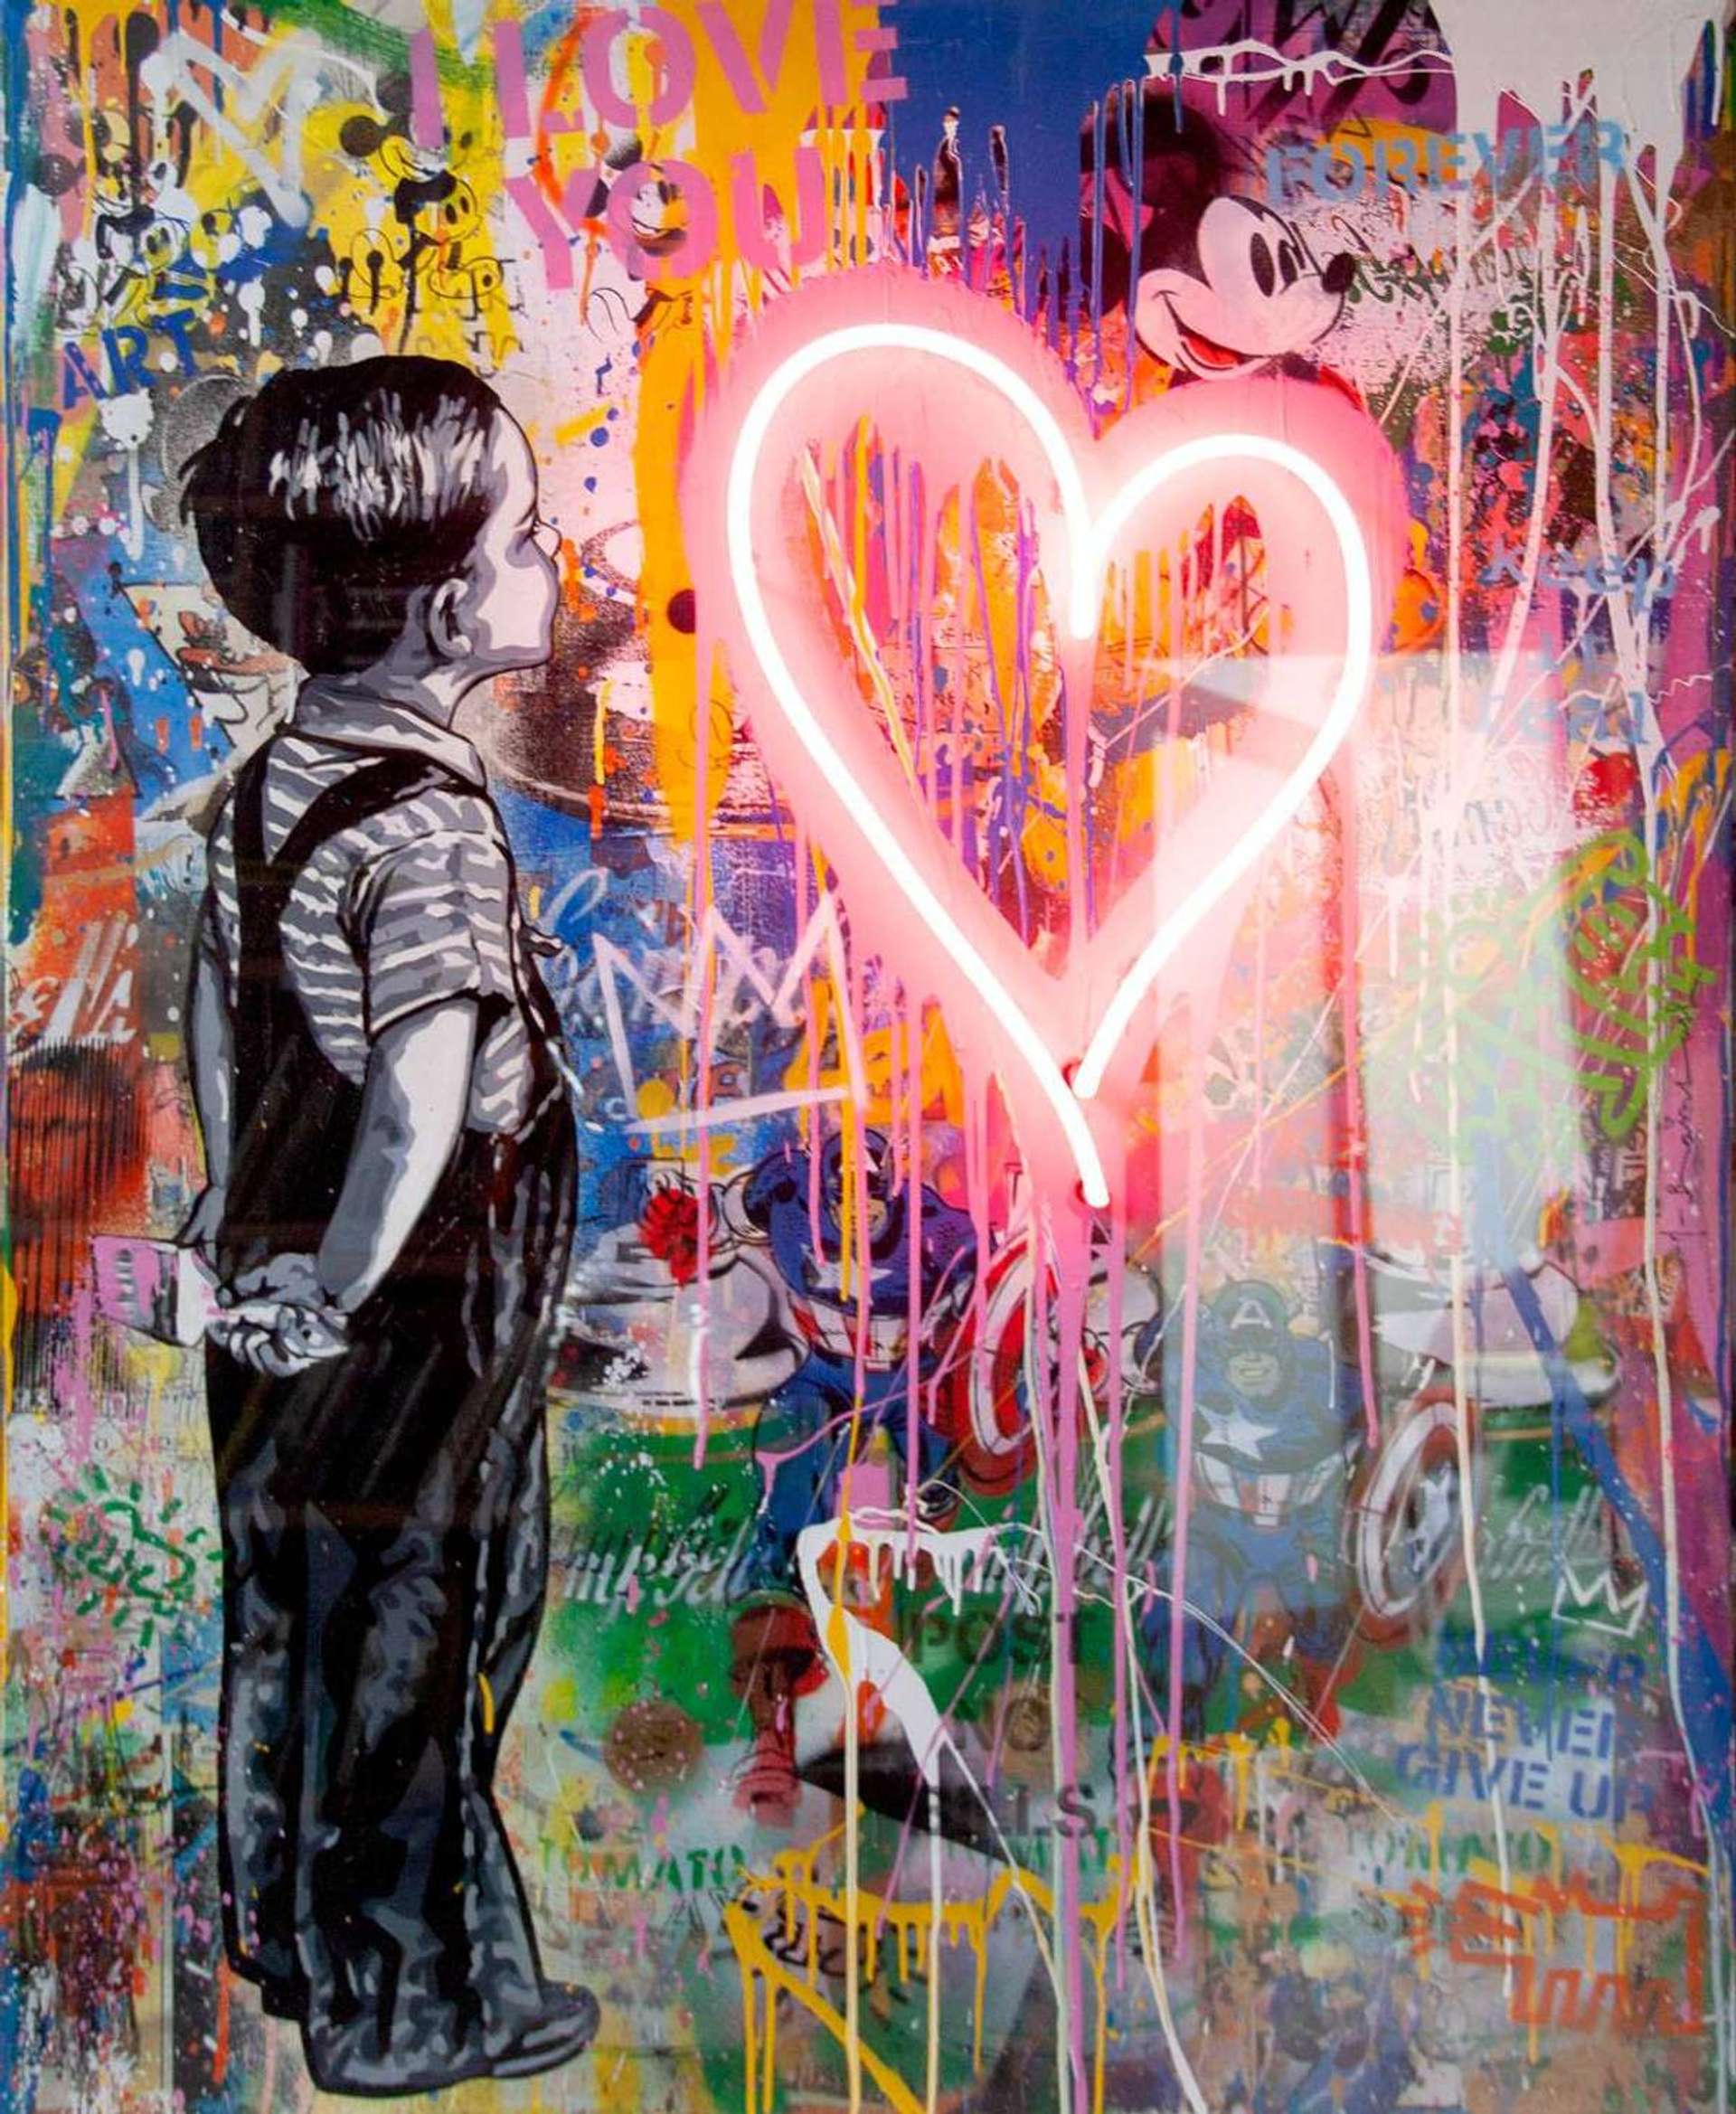 An image of the painting With All My Love by Mr. Brainwash, featuring a monochrome young boy admiring a bright pink neon heart against a colourfully splattered background featuring Warhol’s Campbell’s Soups